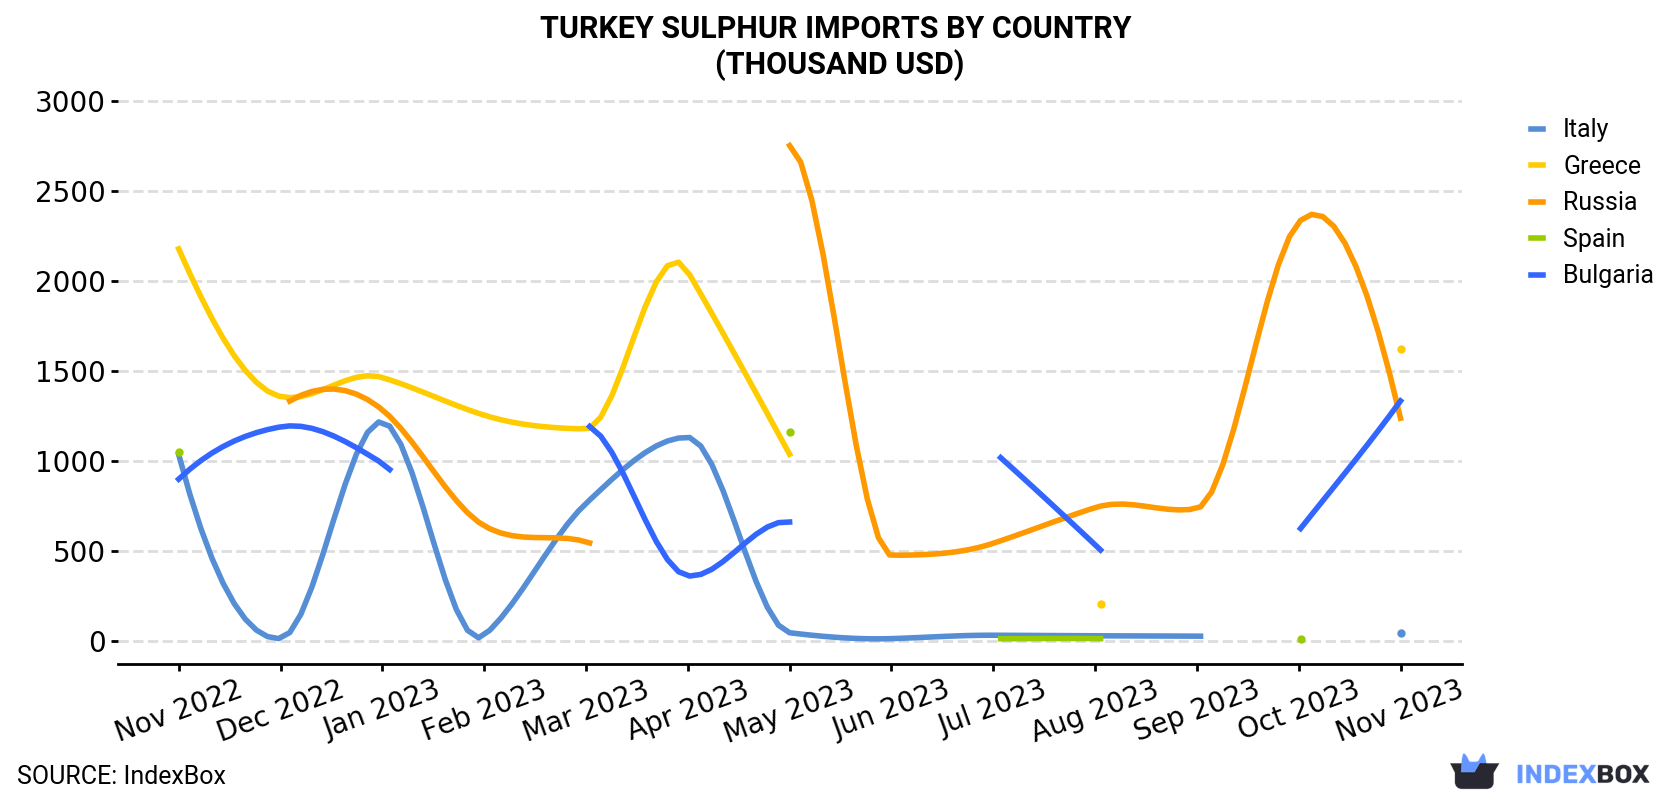 Turkey Sulphur Imports By Country (Thousand USD)